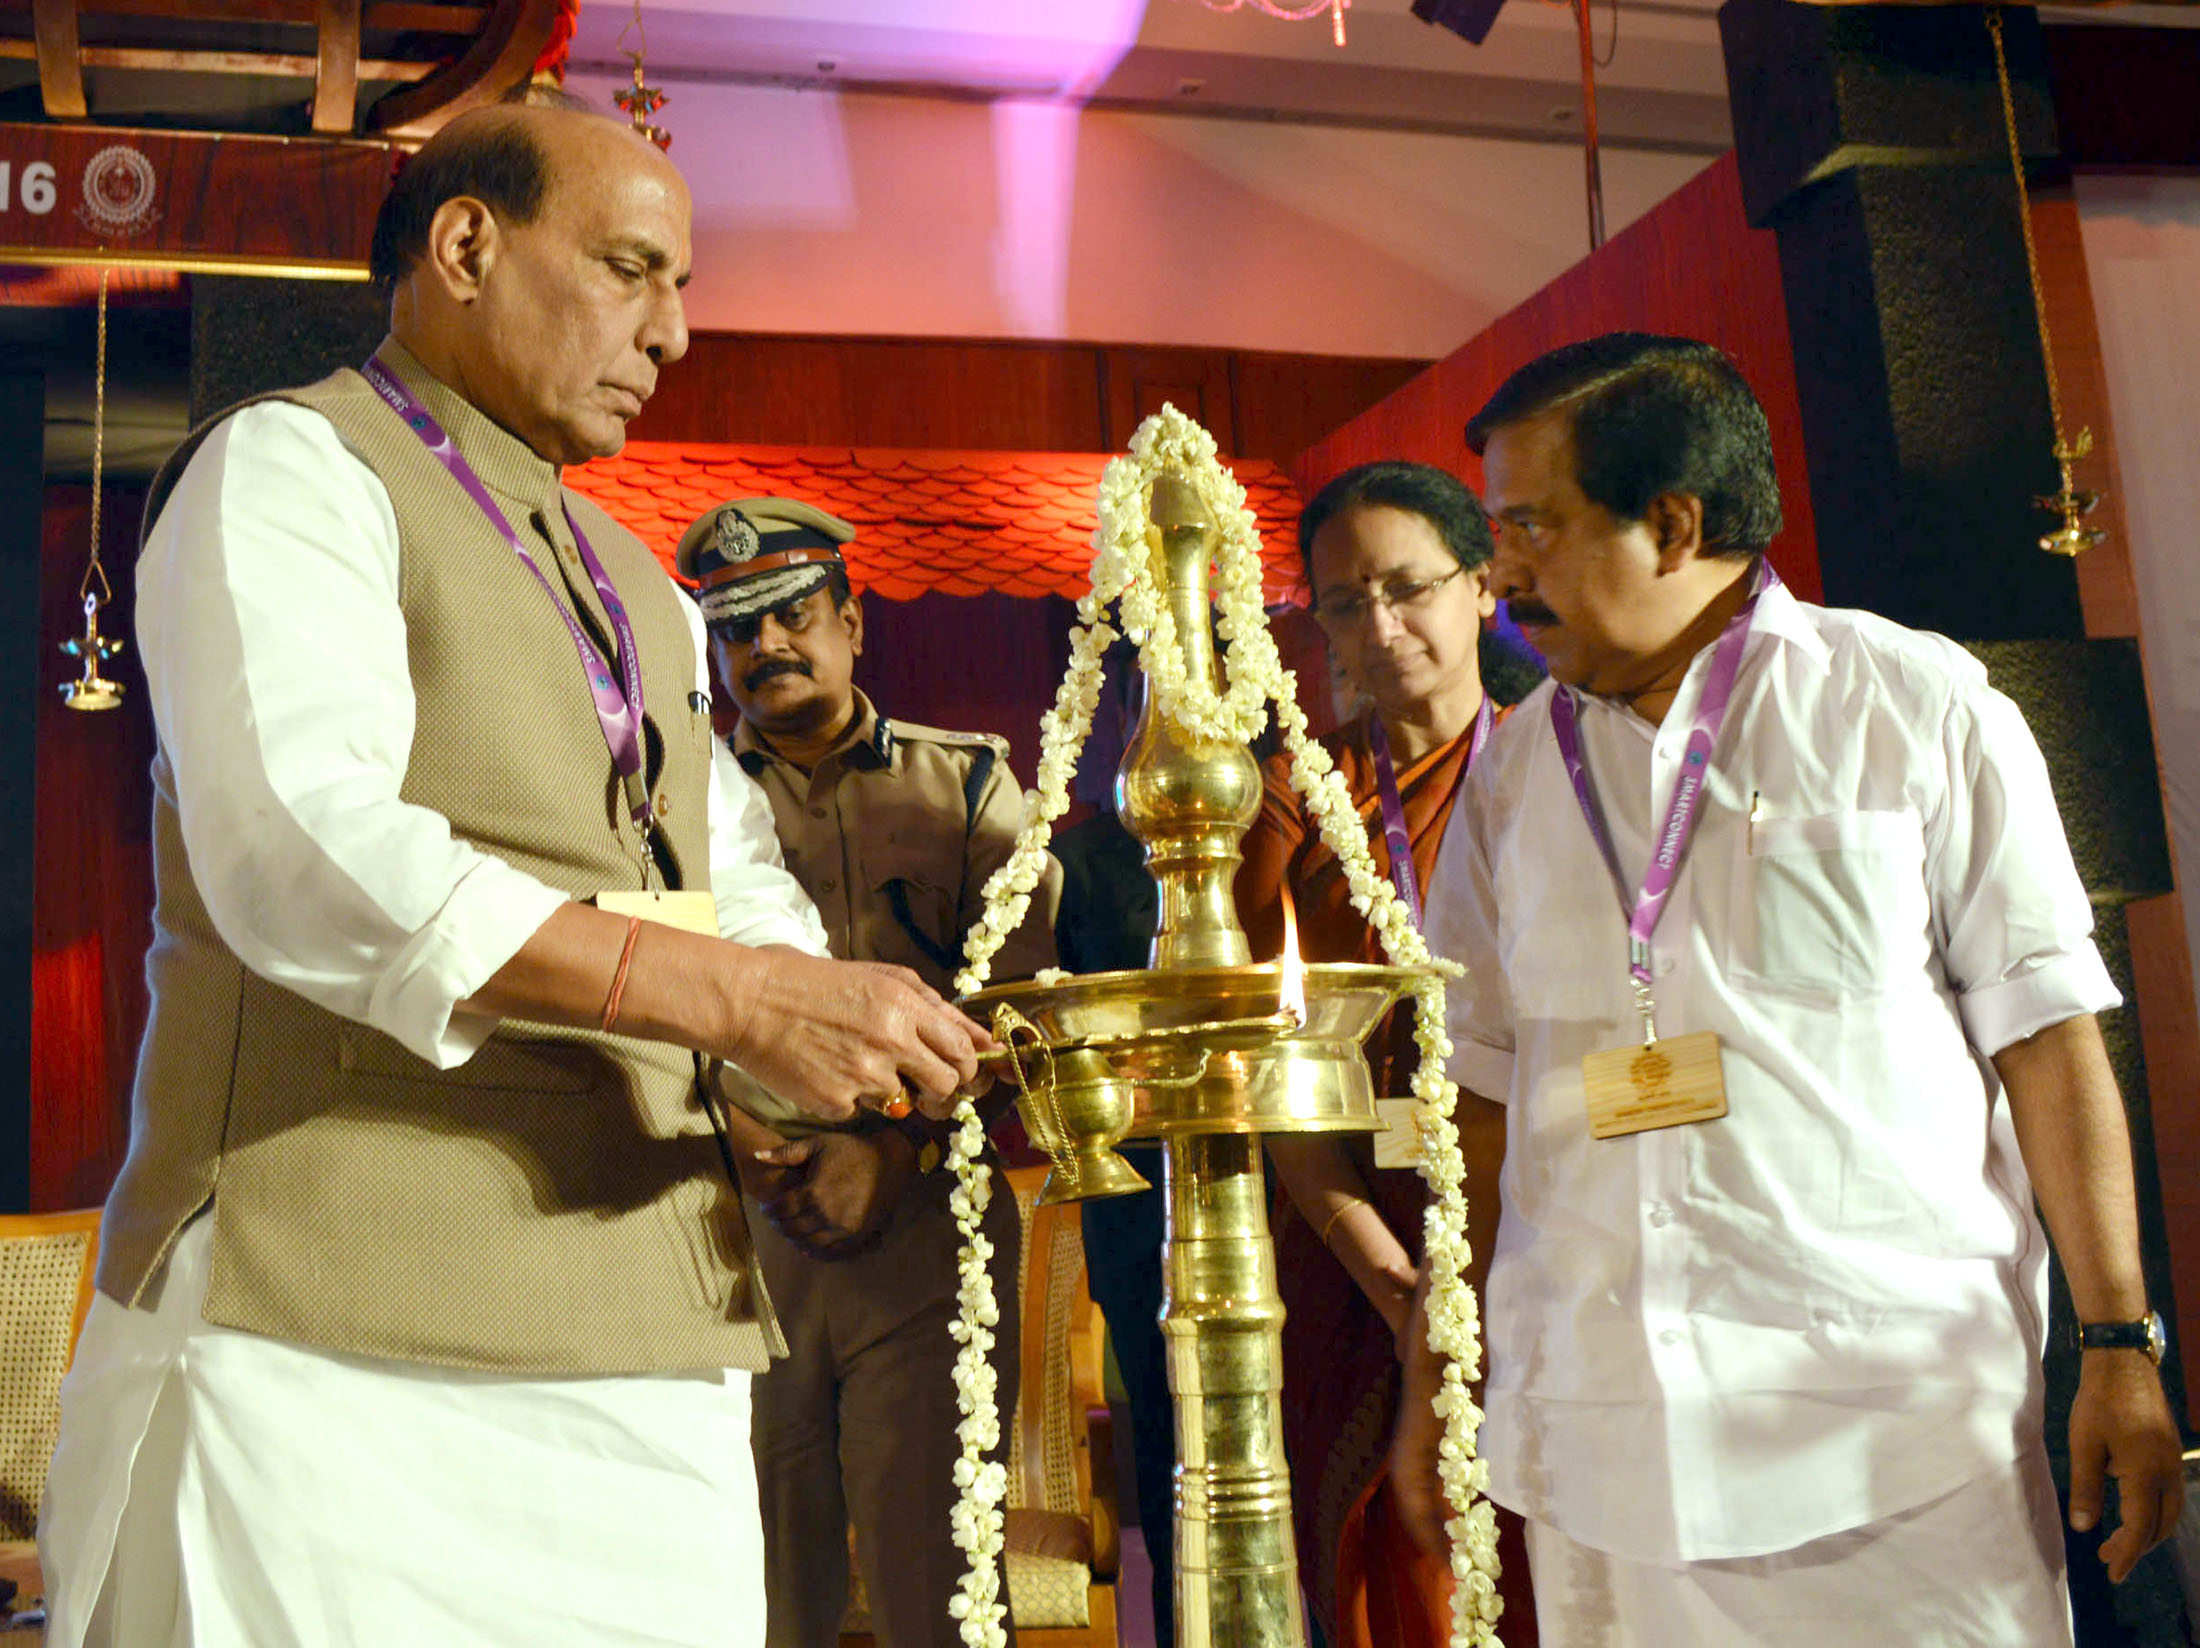 The Union Home Minister, Shri Rajnath Singh lighting the traditional lamp to inaugurate the National Conclave on Community Policing, at Kovalam, in Thiruvananthapuram Kerala on January 27, 2016.  	The Kerala Home Minister, Shri Ramesh Chennithala, the State Home Secretary, Smt. Nalini Netto and the State DGP, T.P. Senkumar are also seen.